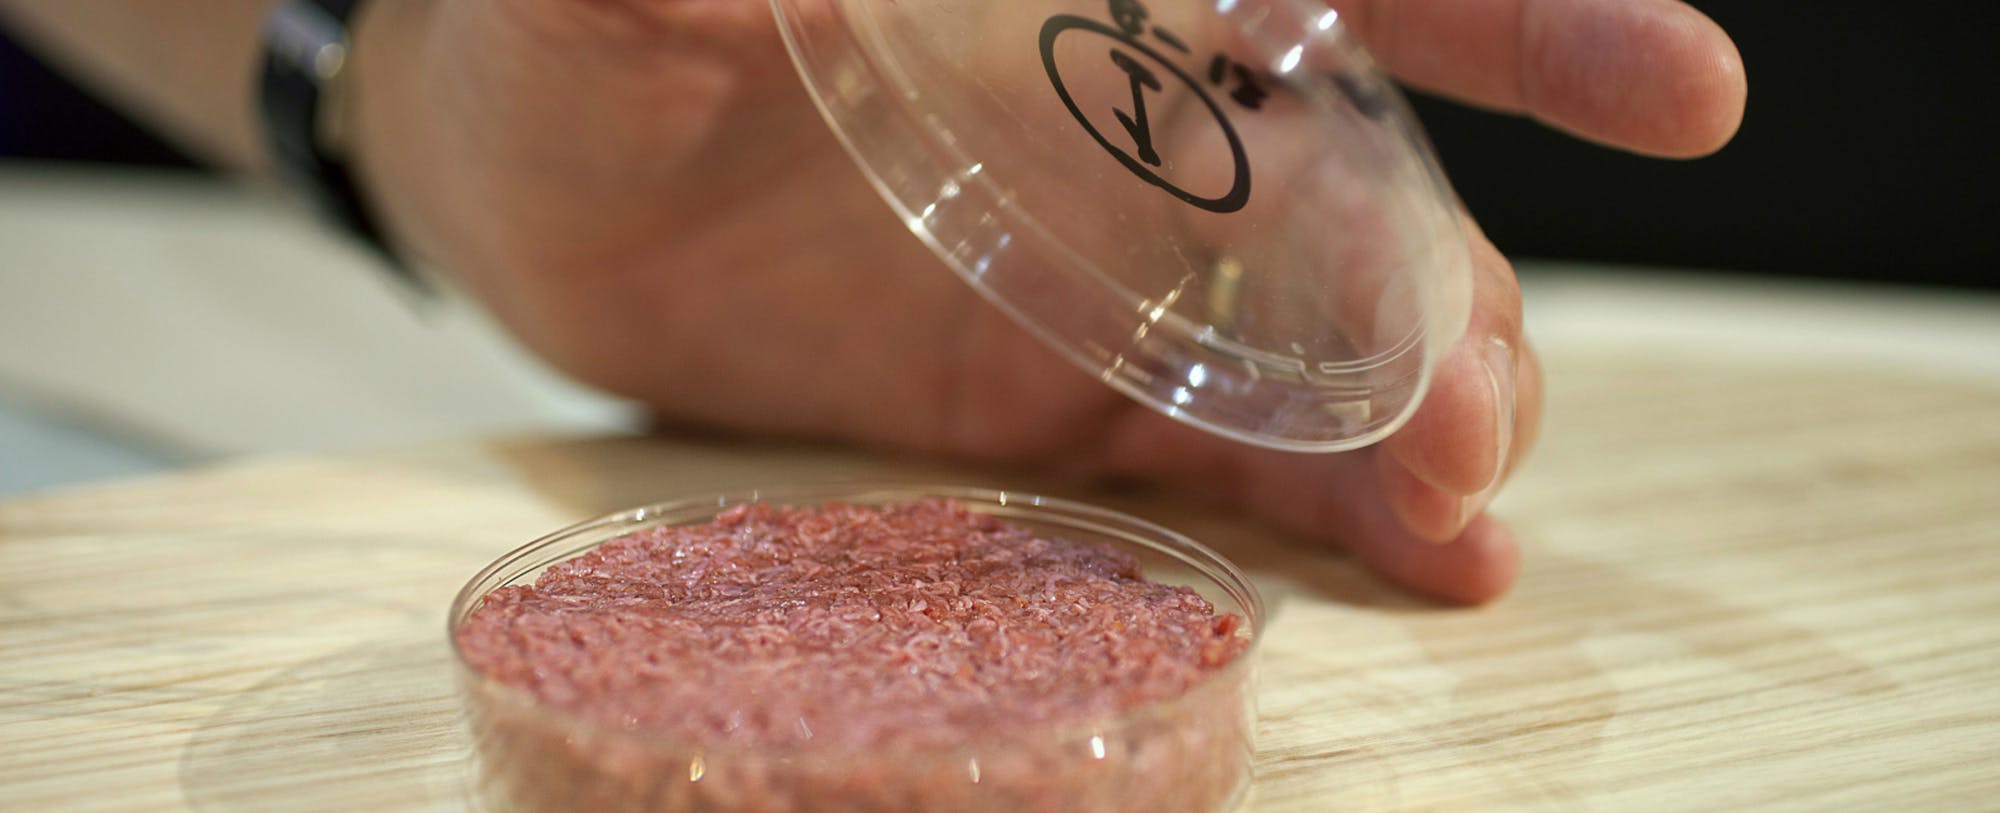 Meat your Maker: Science may be one step ahead of bio-burger believers 